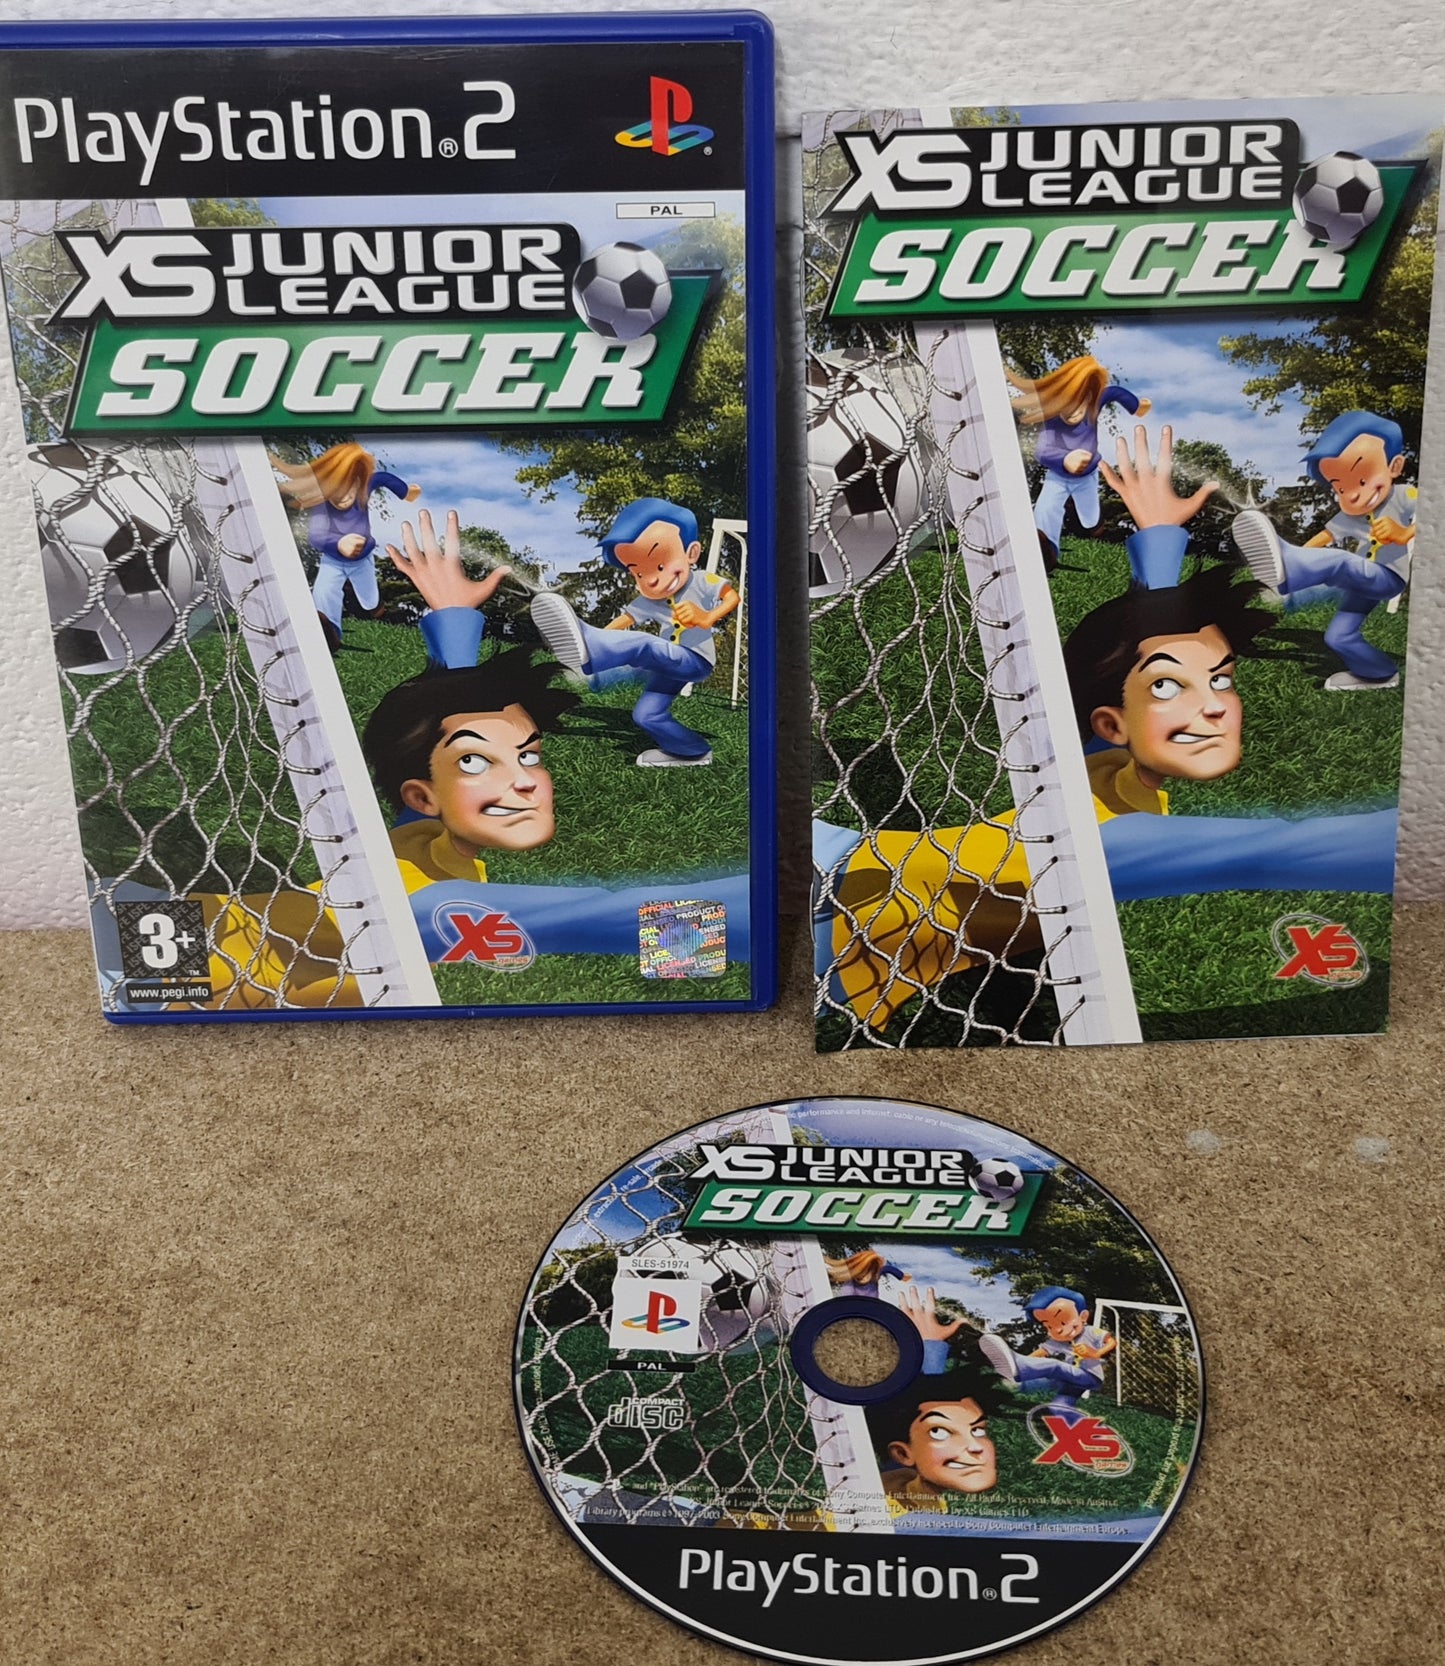 XS Junior League Soccer Sony Playstation 2 (PS2) Game